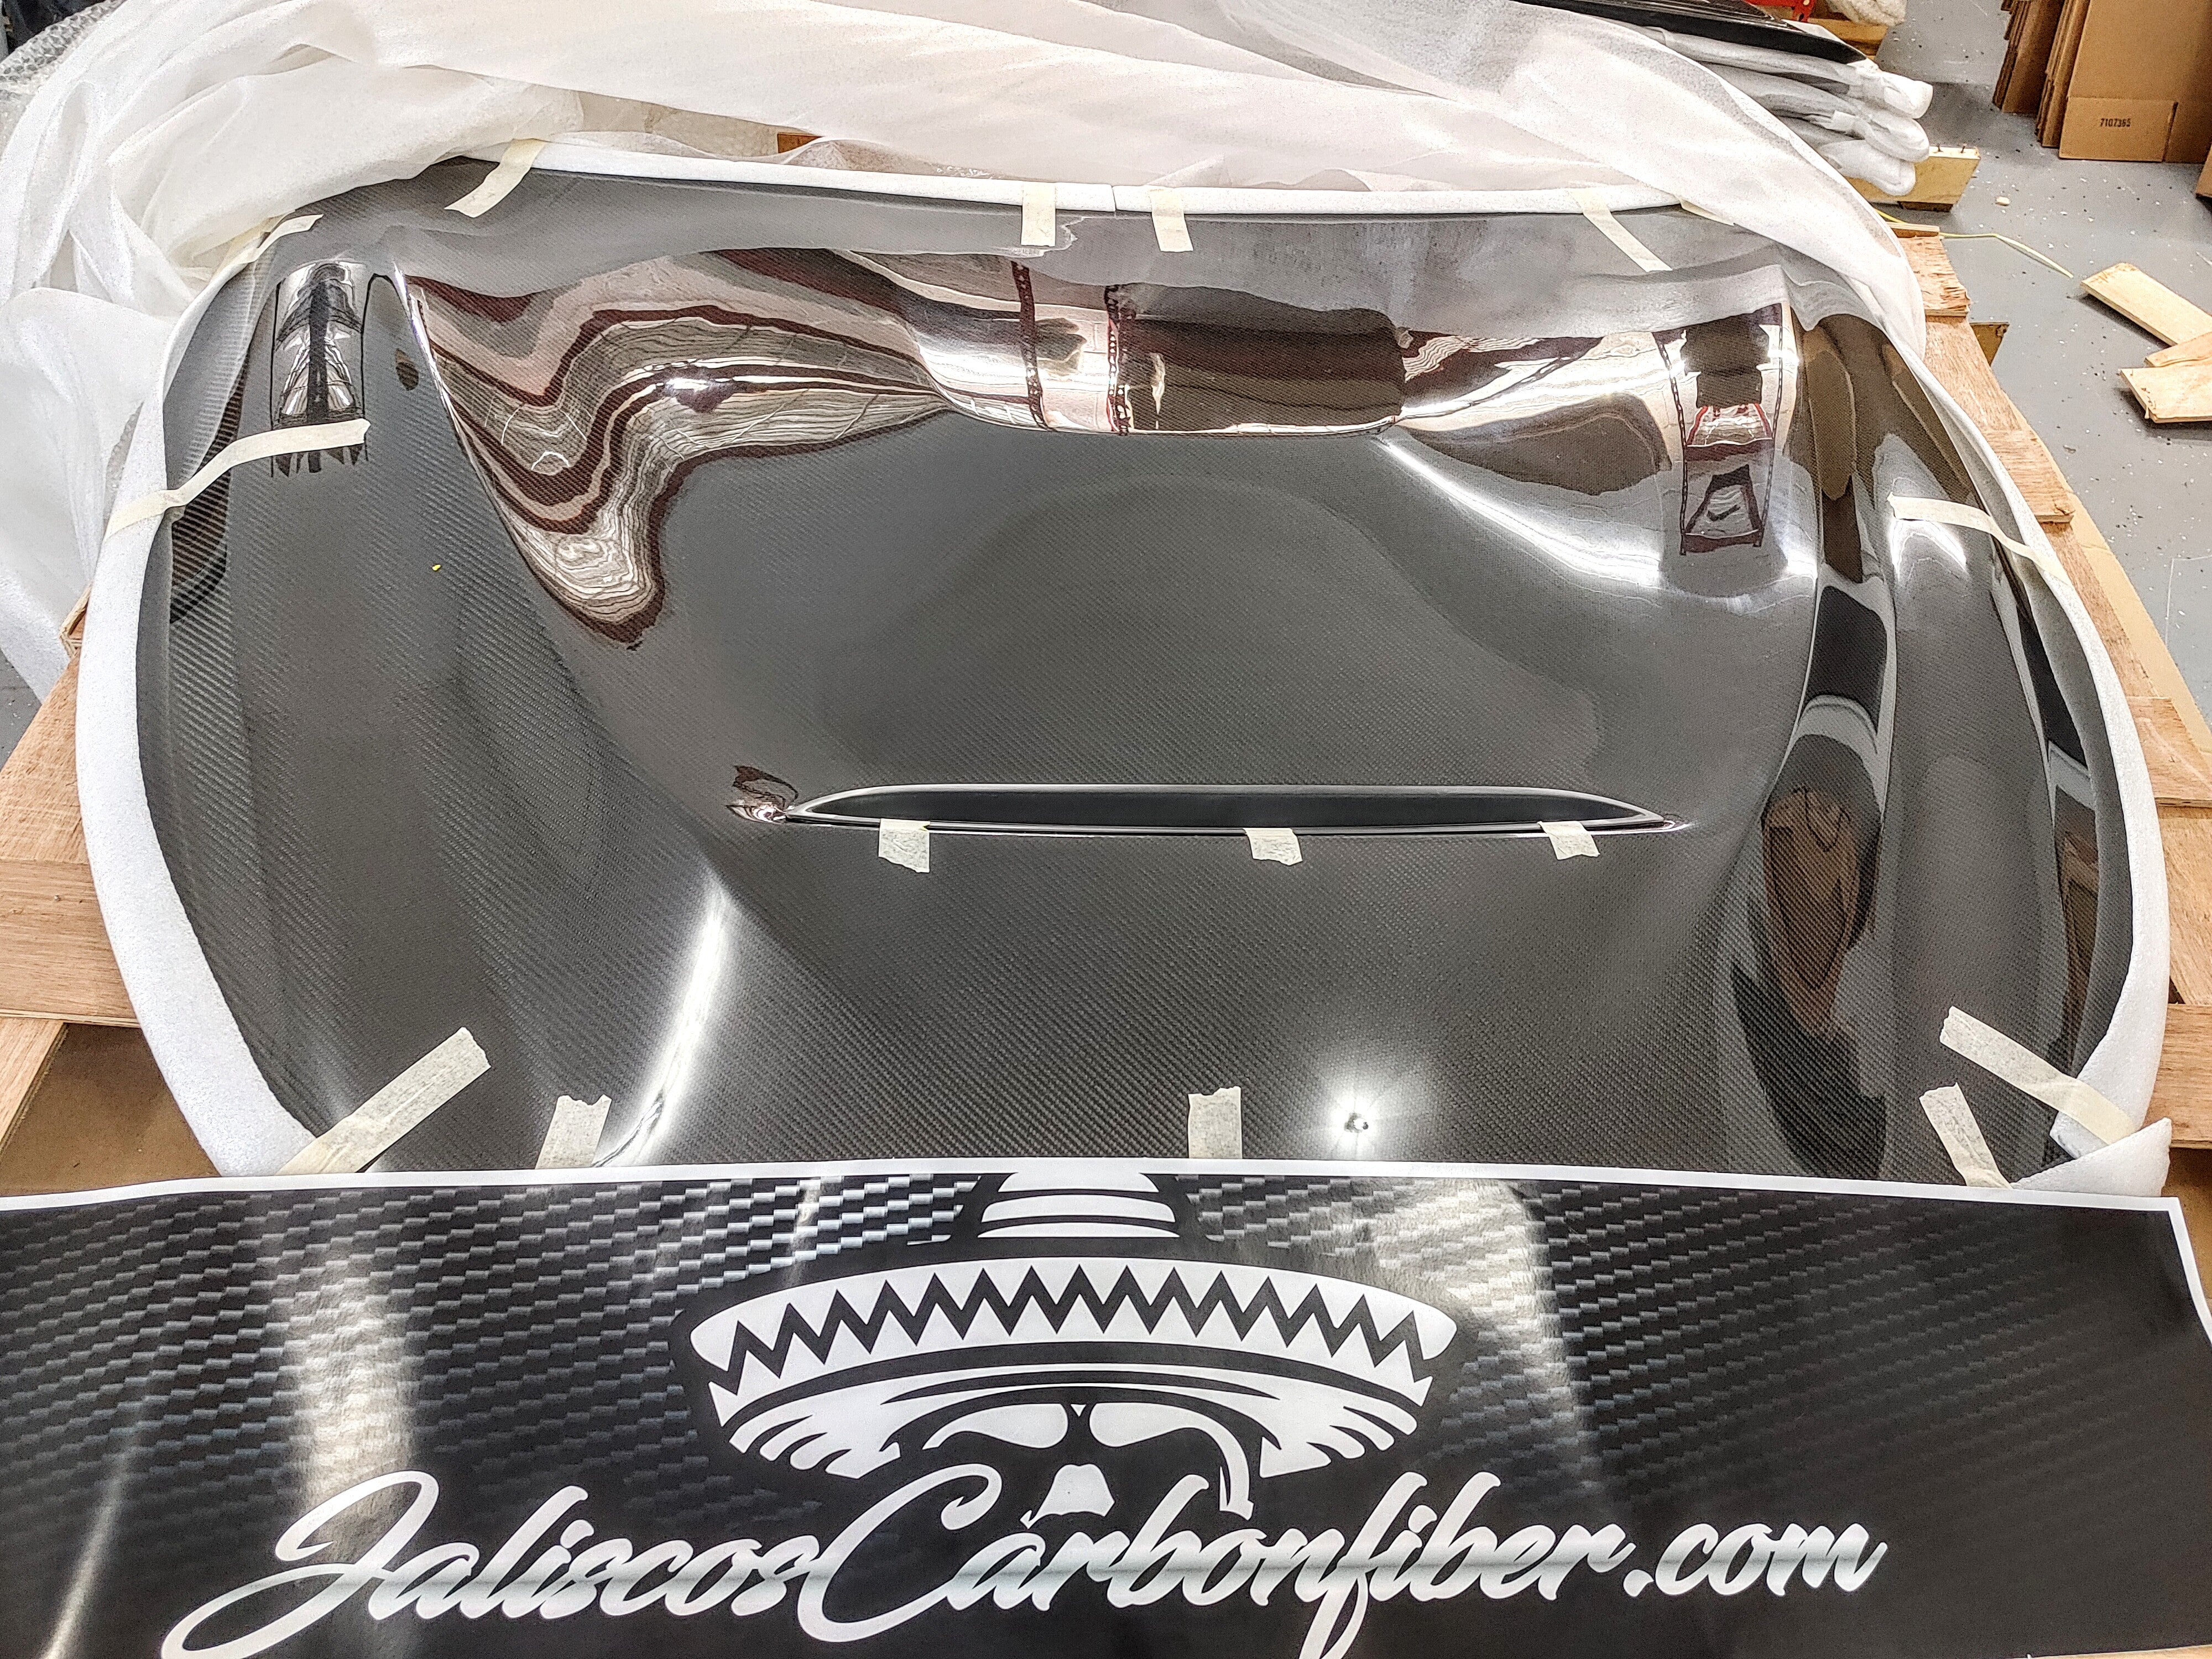 JCF Carbon Fiber Hood for Q60, wrapped and prepared for freight shipping from the warehouse.